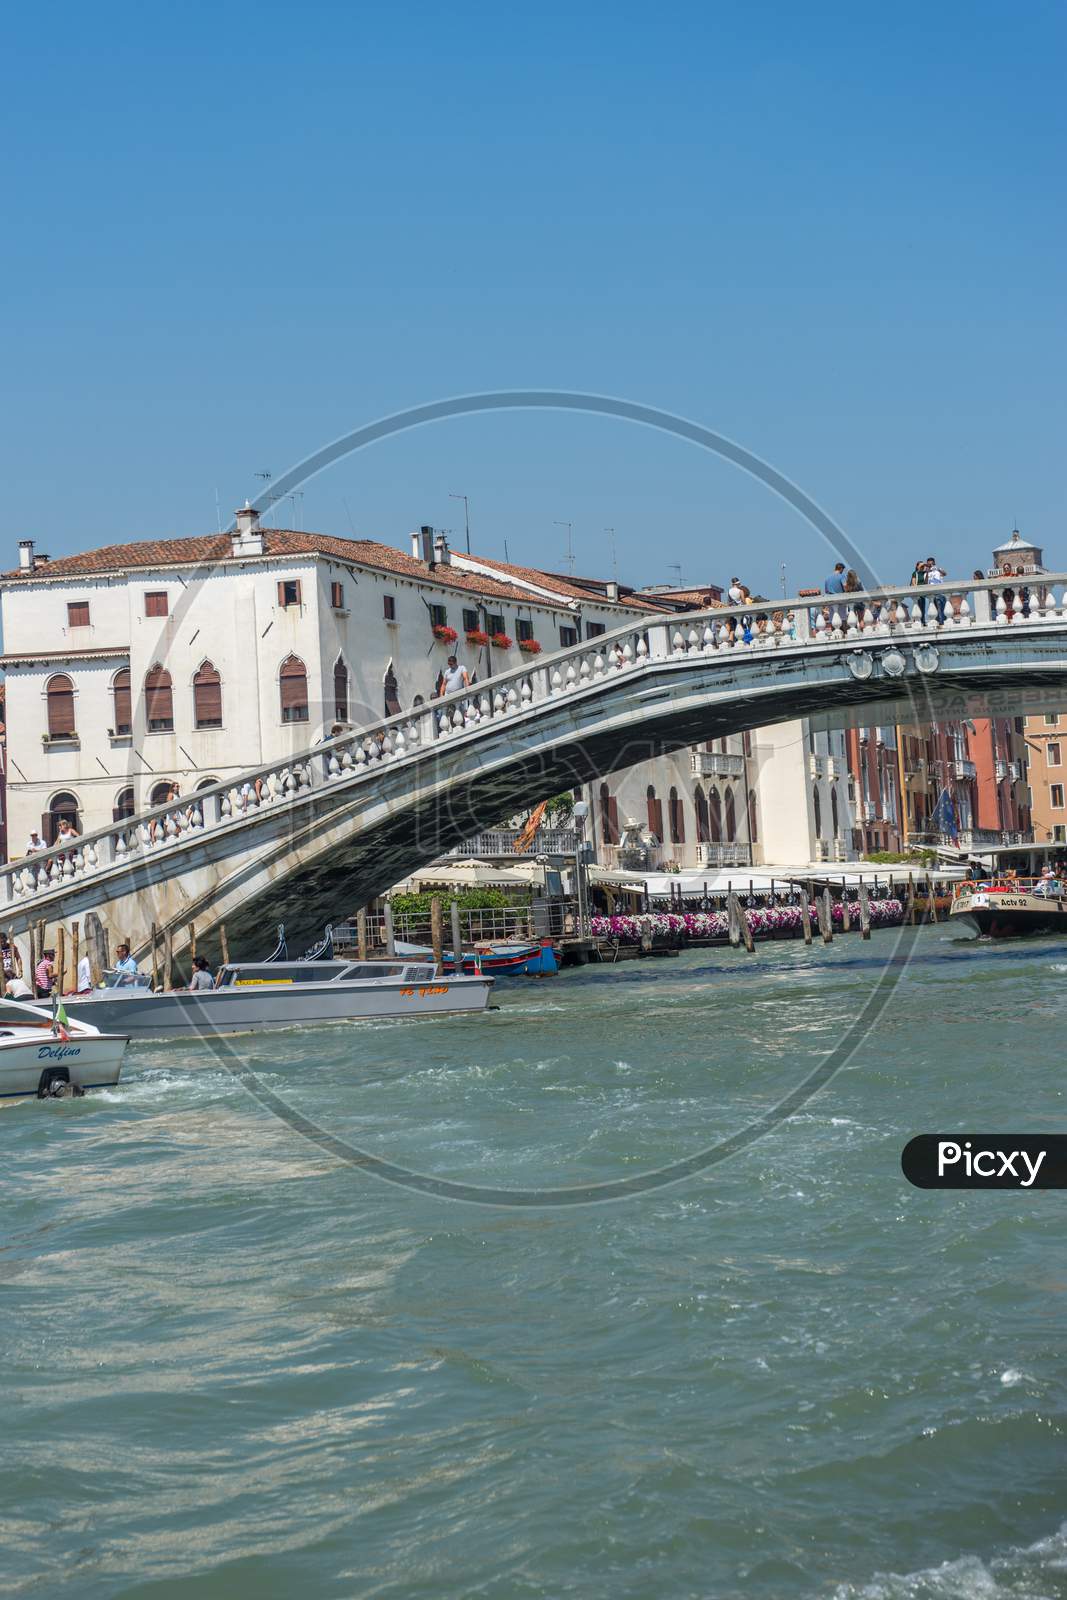 Venice, Italy - 30 June 2018: People Walking On The Bridge Over A Canal In Venice, Italy